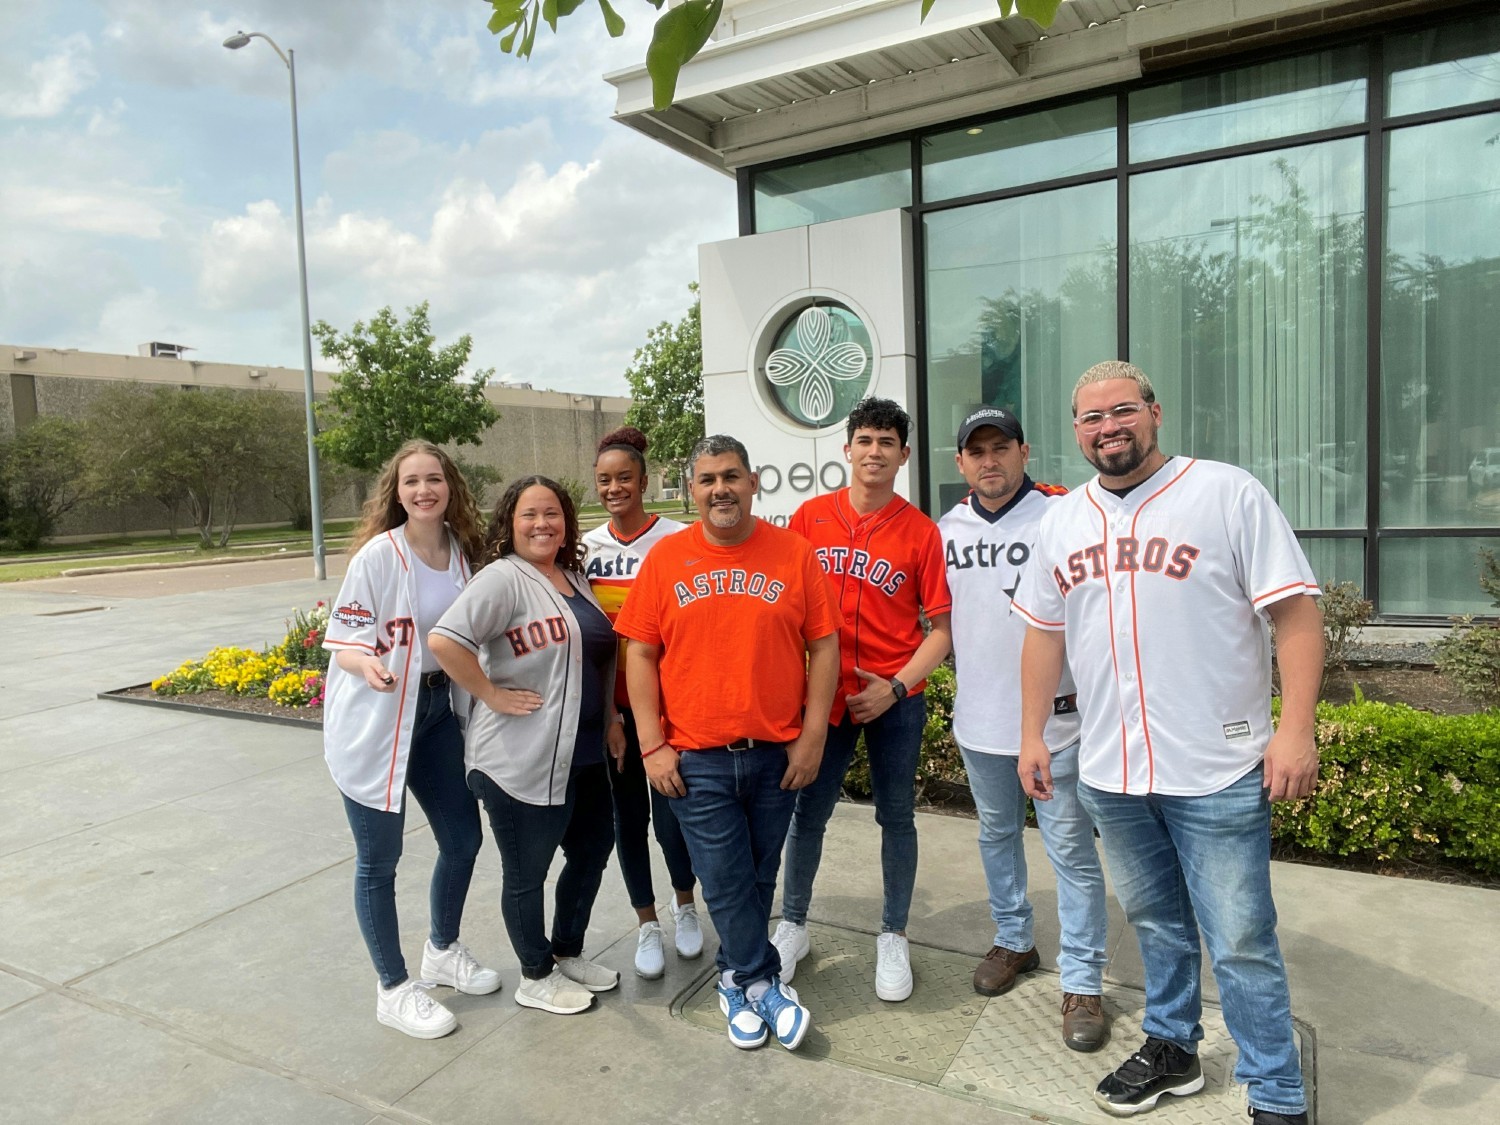 When you're headquartered in Houston, TX, who else would our team members root for? Let's Go Astros!